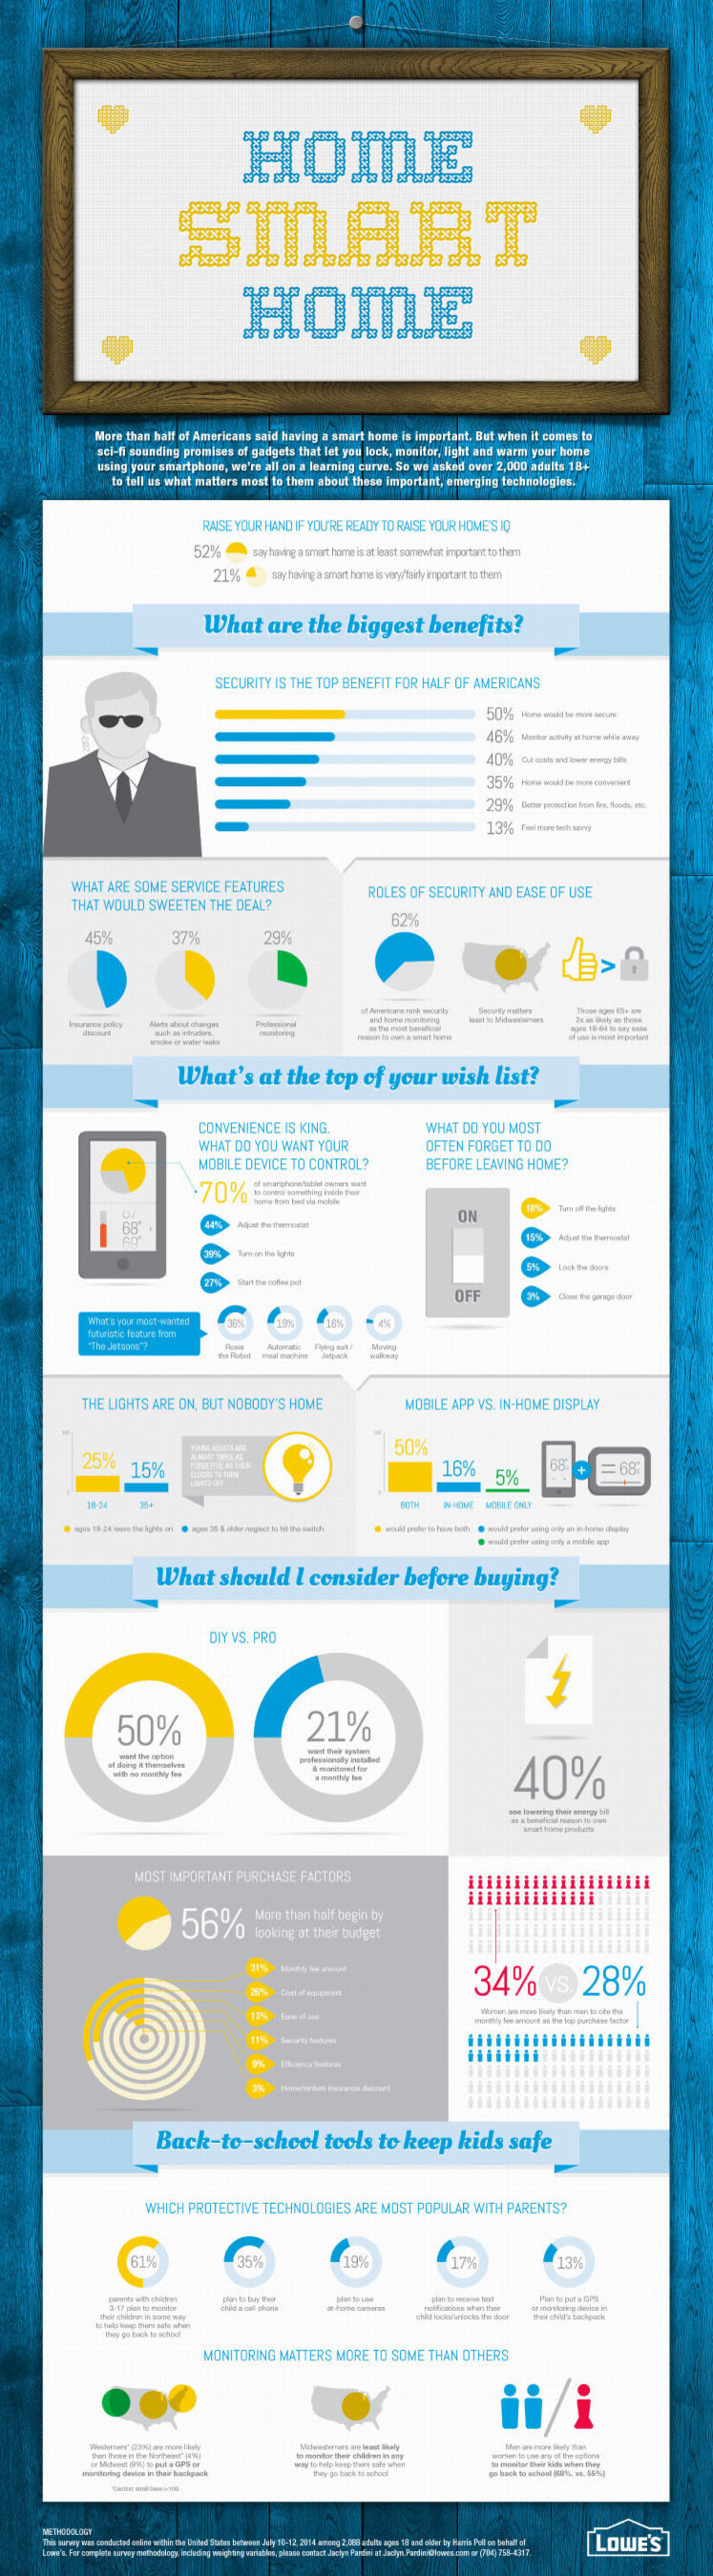 Lowe's 2014 Smart Home Survey examined Americans' attitudes and experiences with home automation, with a particular look at the most important features and top reasons for owning smart home products. Download the infographic for more information. (PRNewsFoto/Lowe's Companies, Inc.)